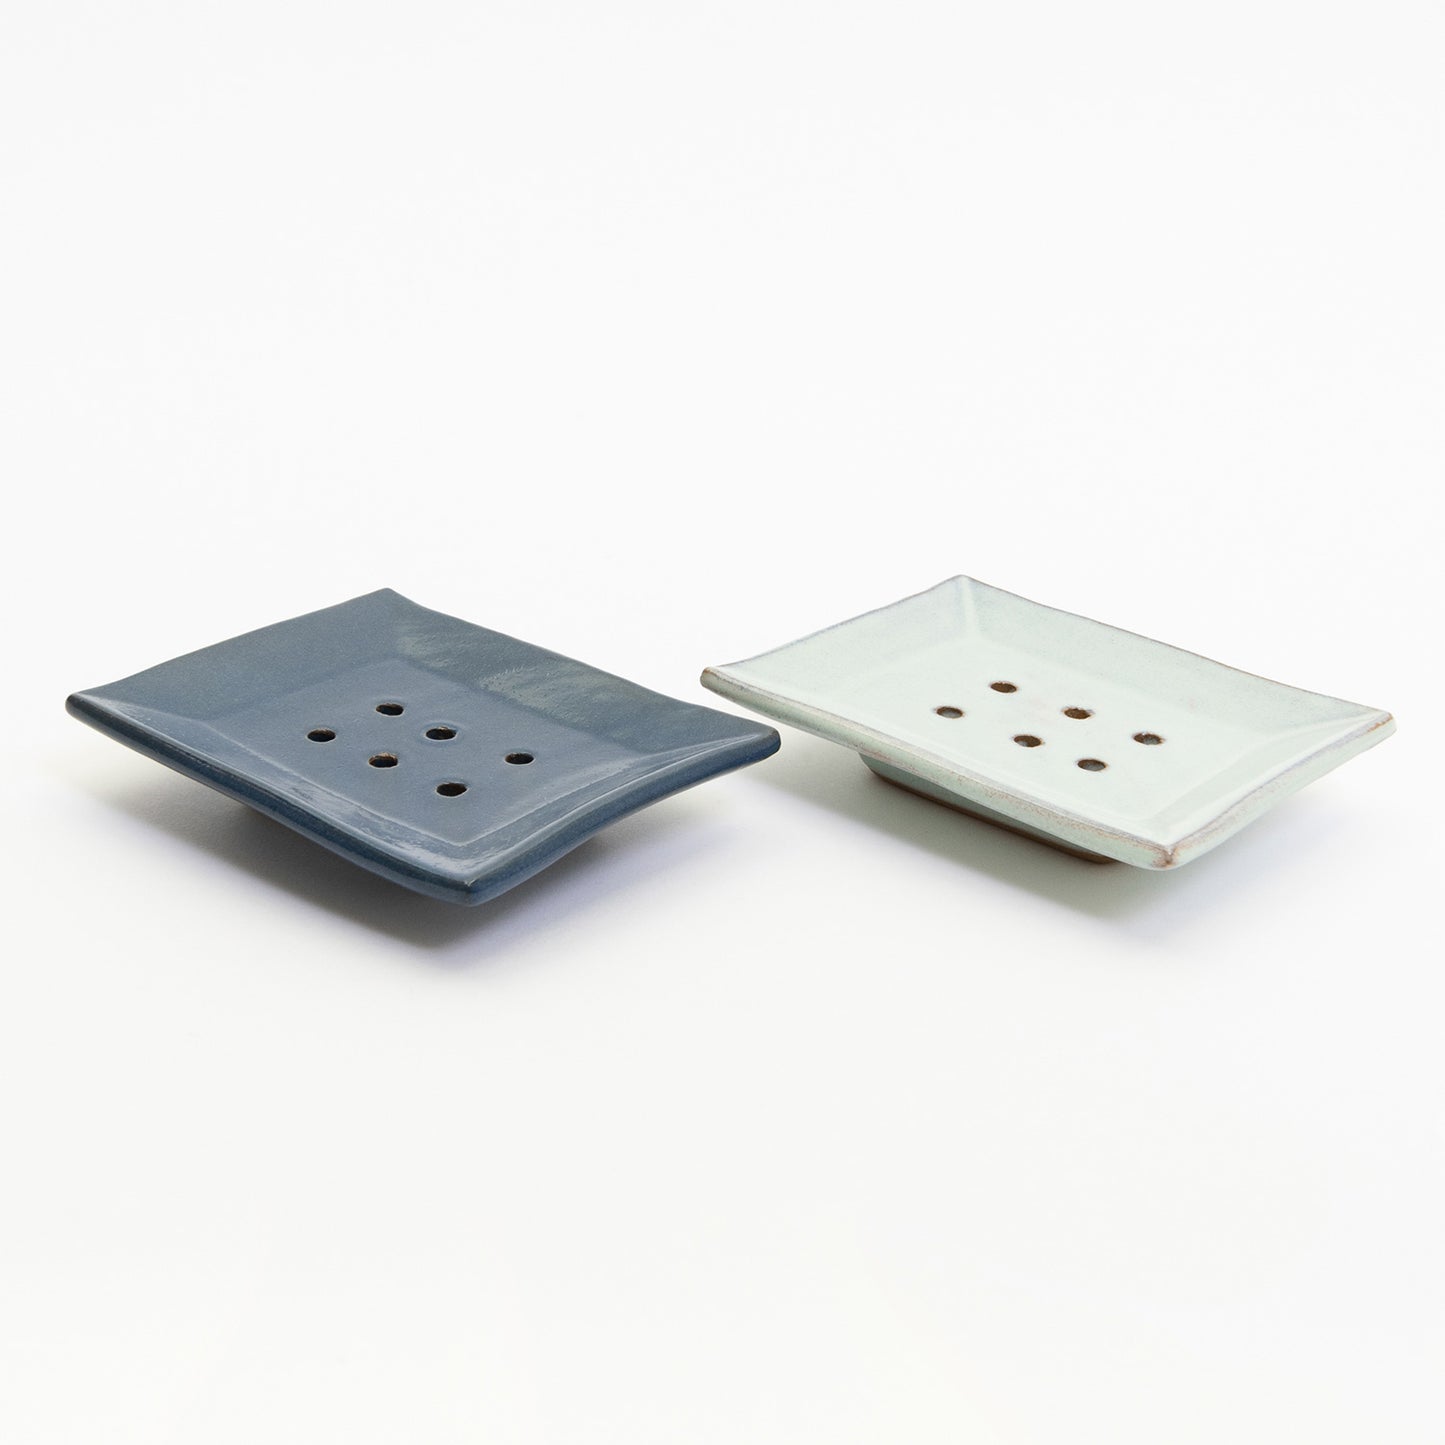 Two stoneware soap dishes in ice blue and cobalt blue colours. Pictured on a white background.